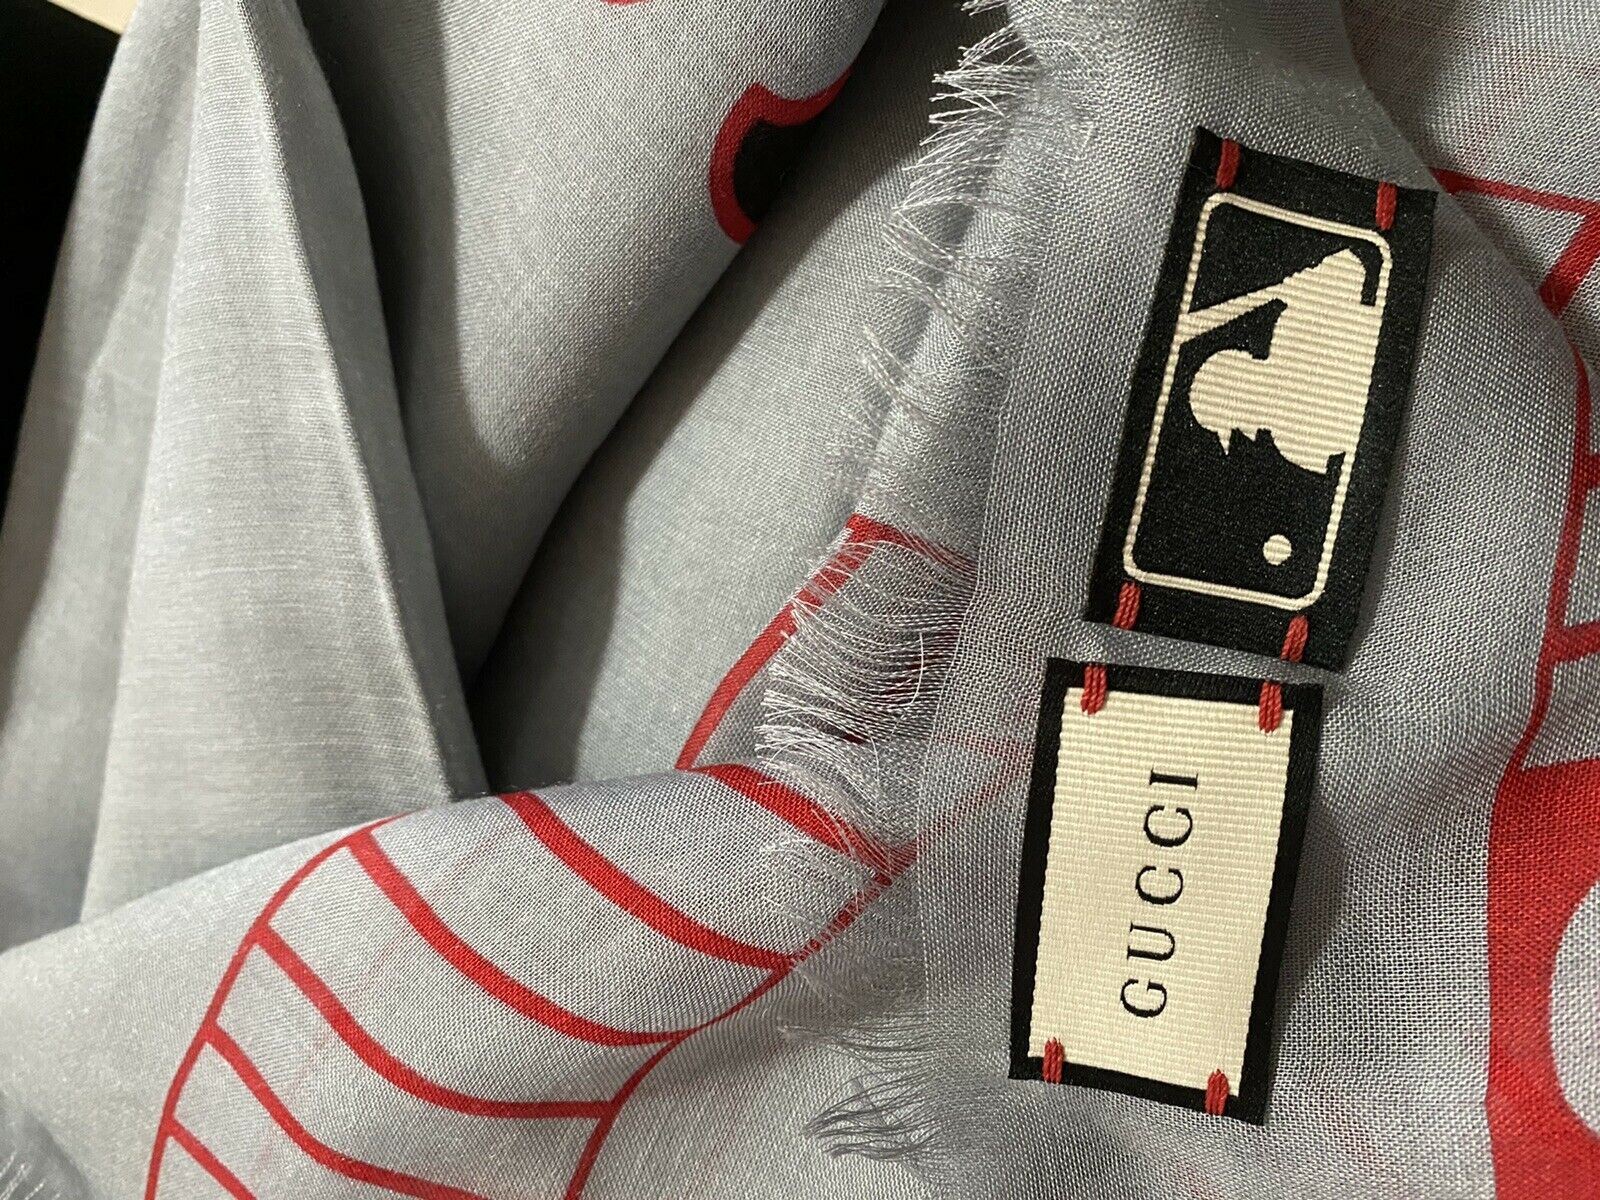 NWT $900 Gucci Men’s Shawl Angels Scarf Lead/Red Italy